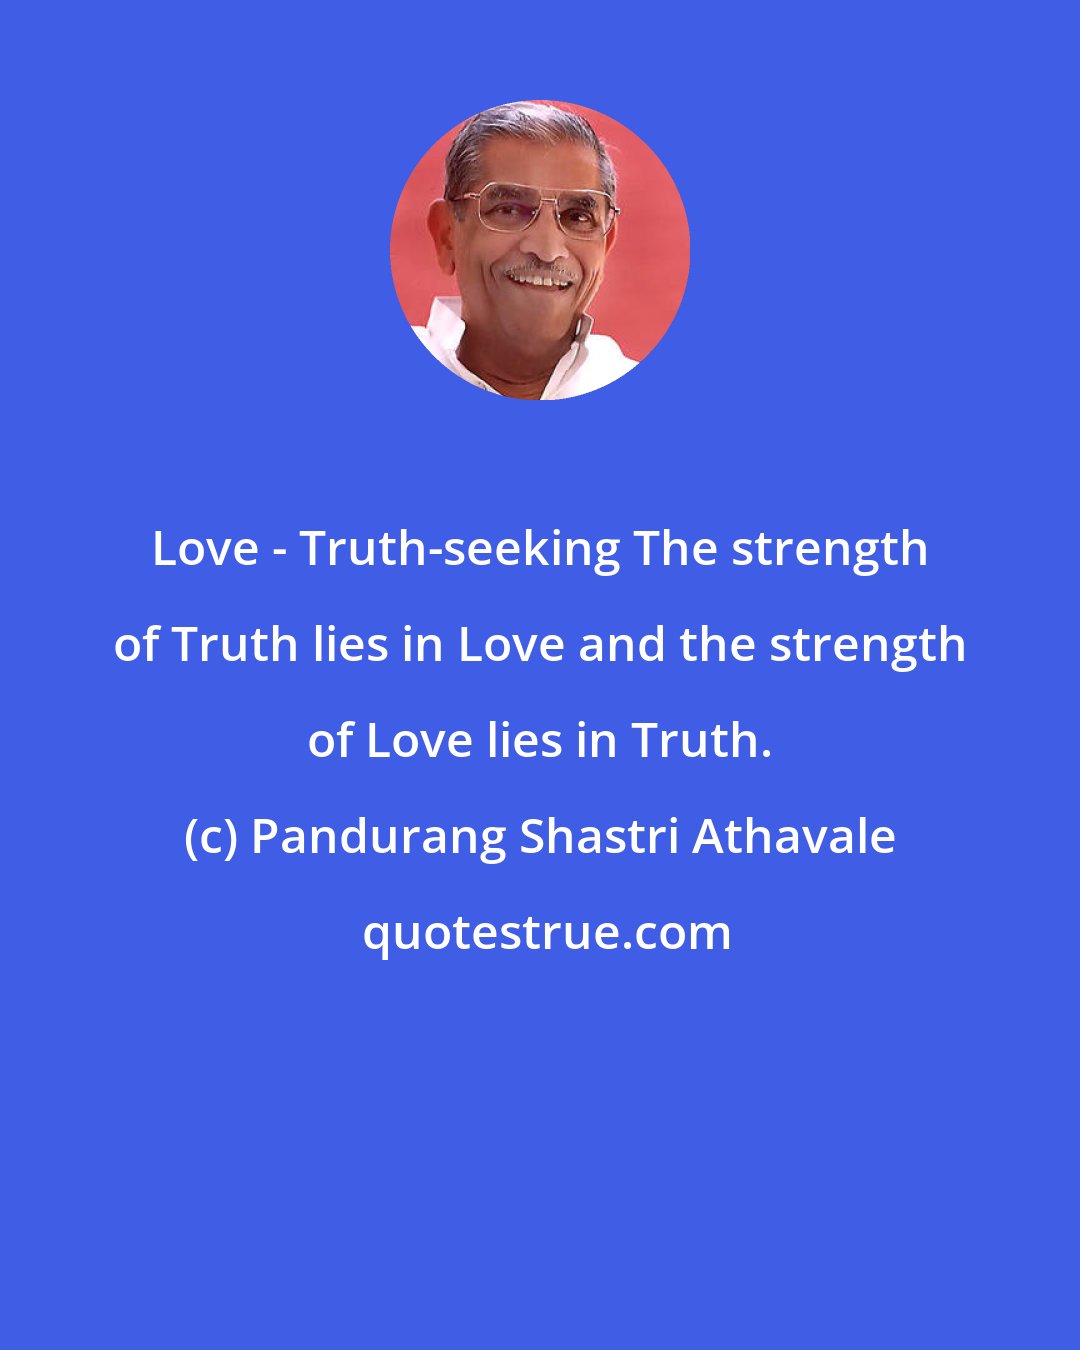 Pandurang Shastri Athavale: Love - Truth-seeking The strength of Truth lies in Love and the strength of Love lies in Truth.